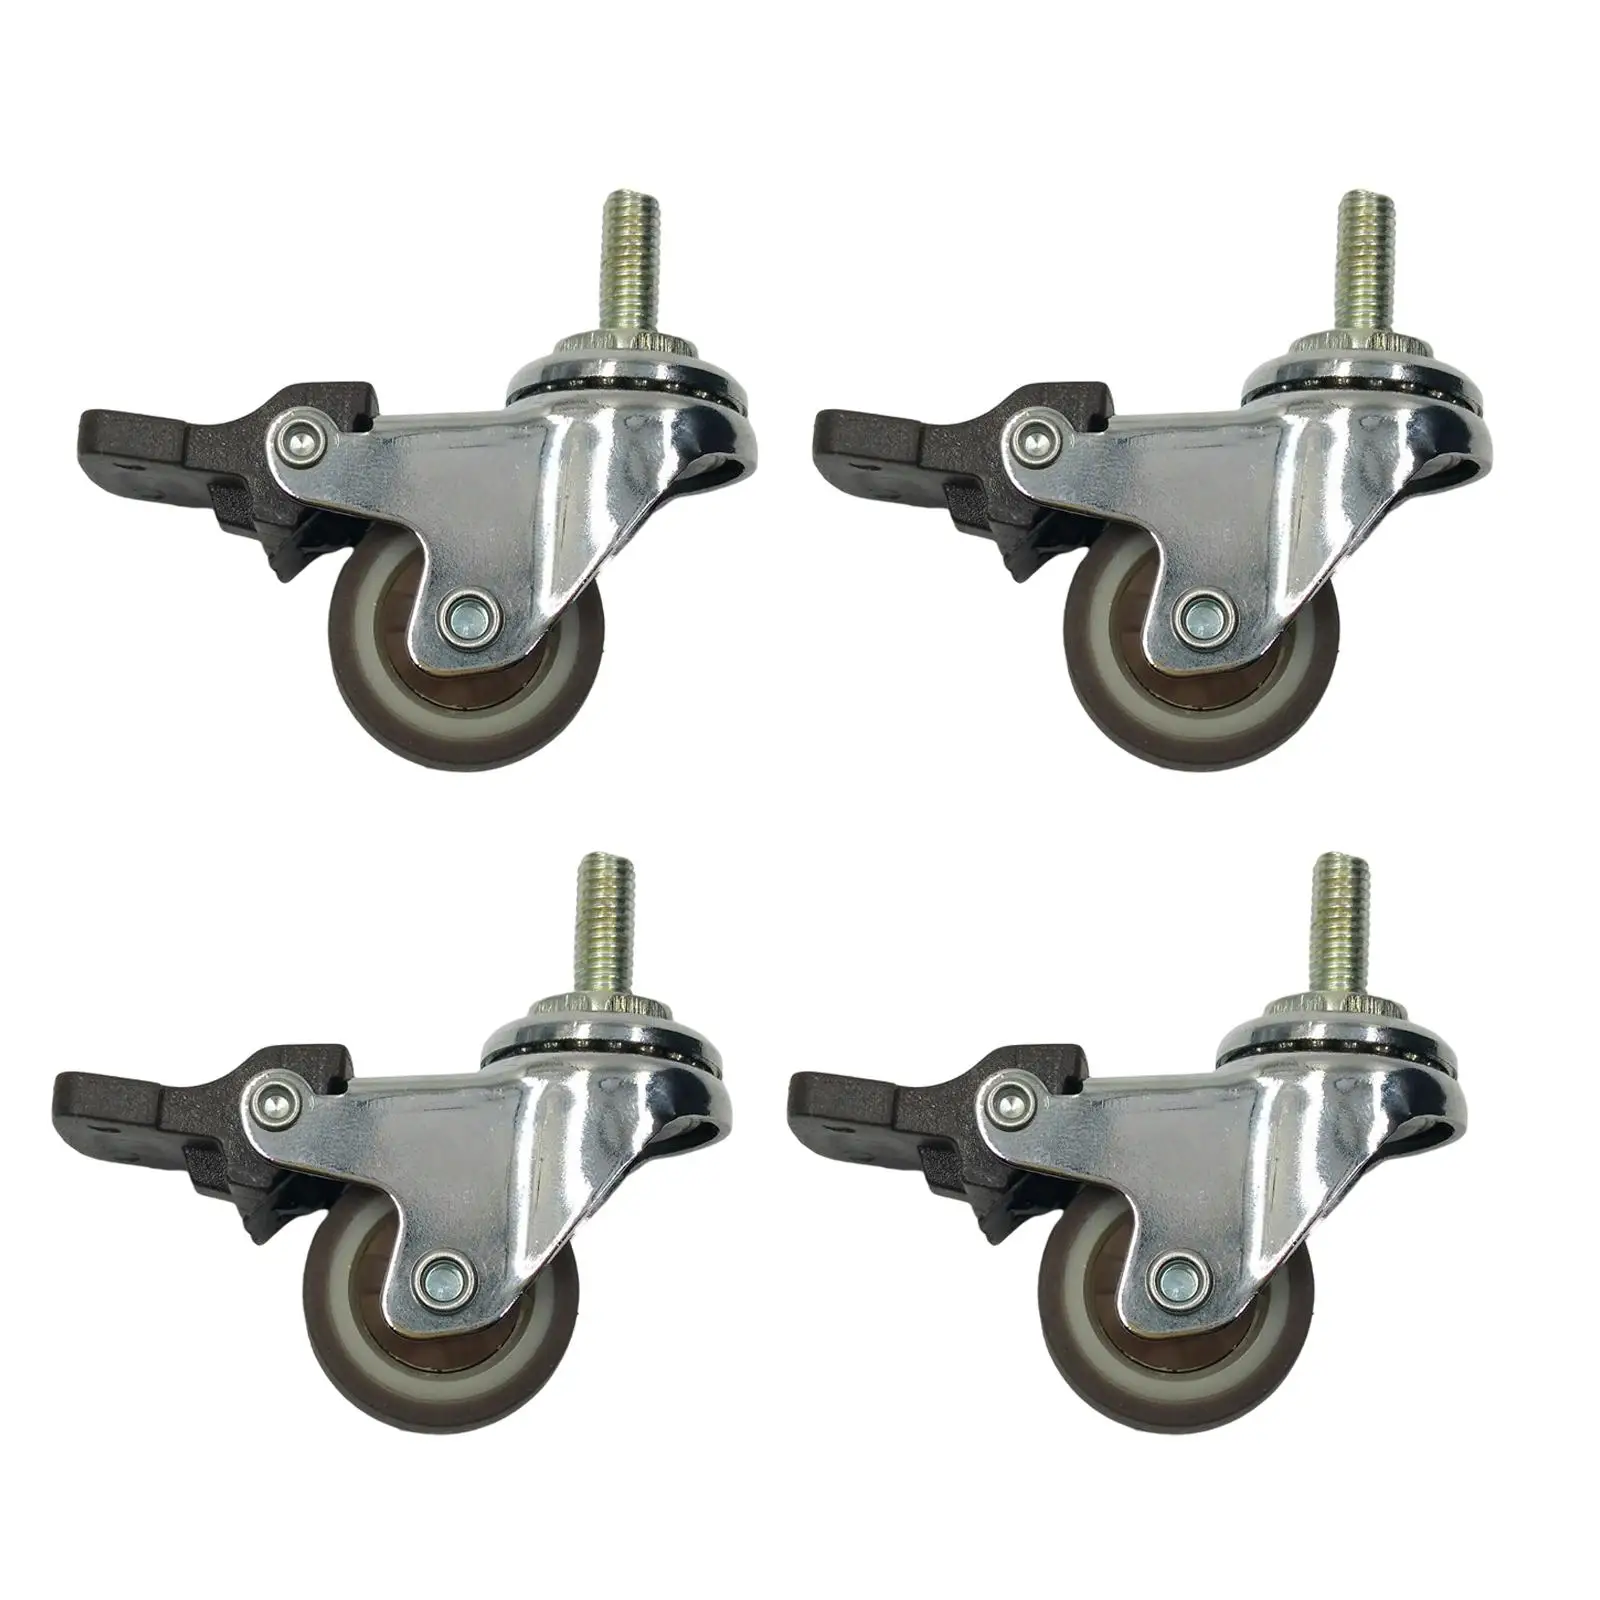 4 x Fixed Castor Wheels 1 inch Mini 360 Degree Rotation Drawer Wheel for Furniture Floor Protecting